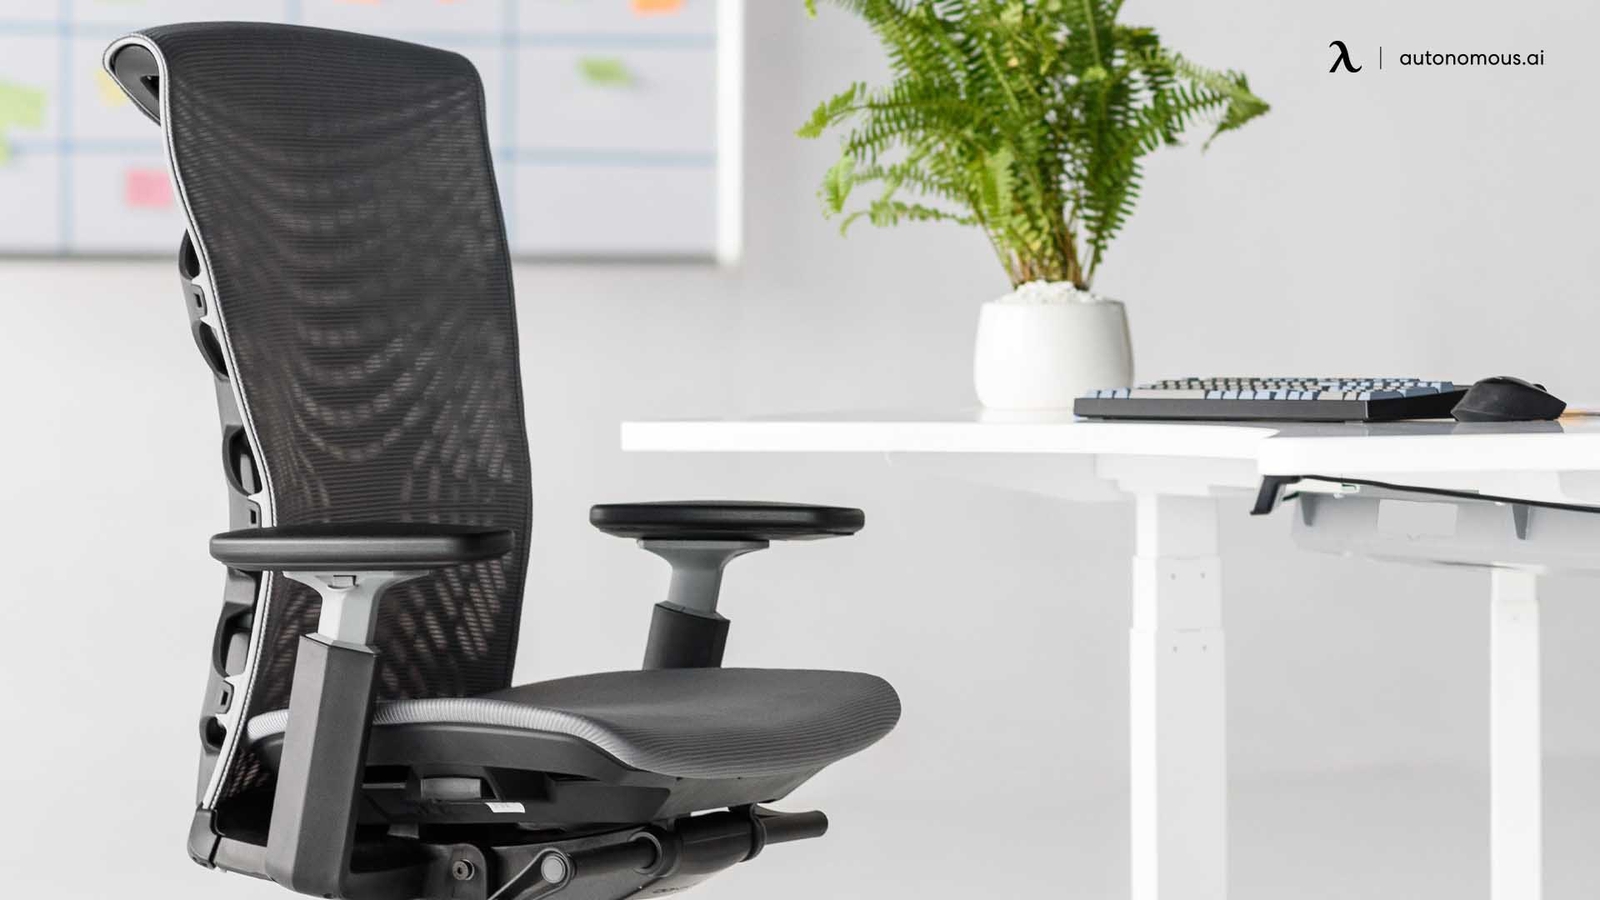 6 Ergonomic Features in an Office Chair for Short People